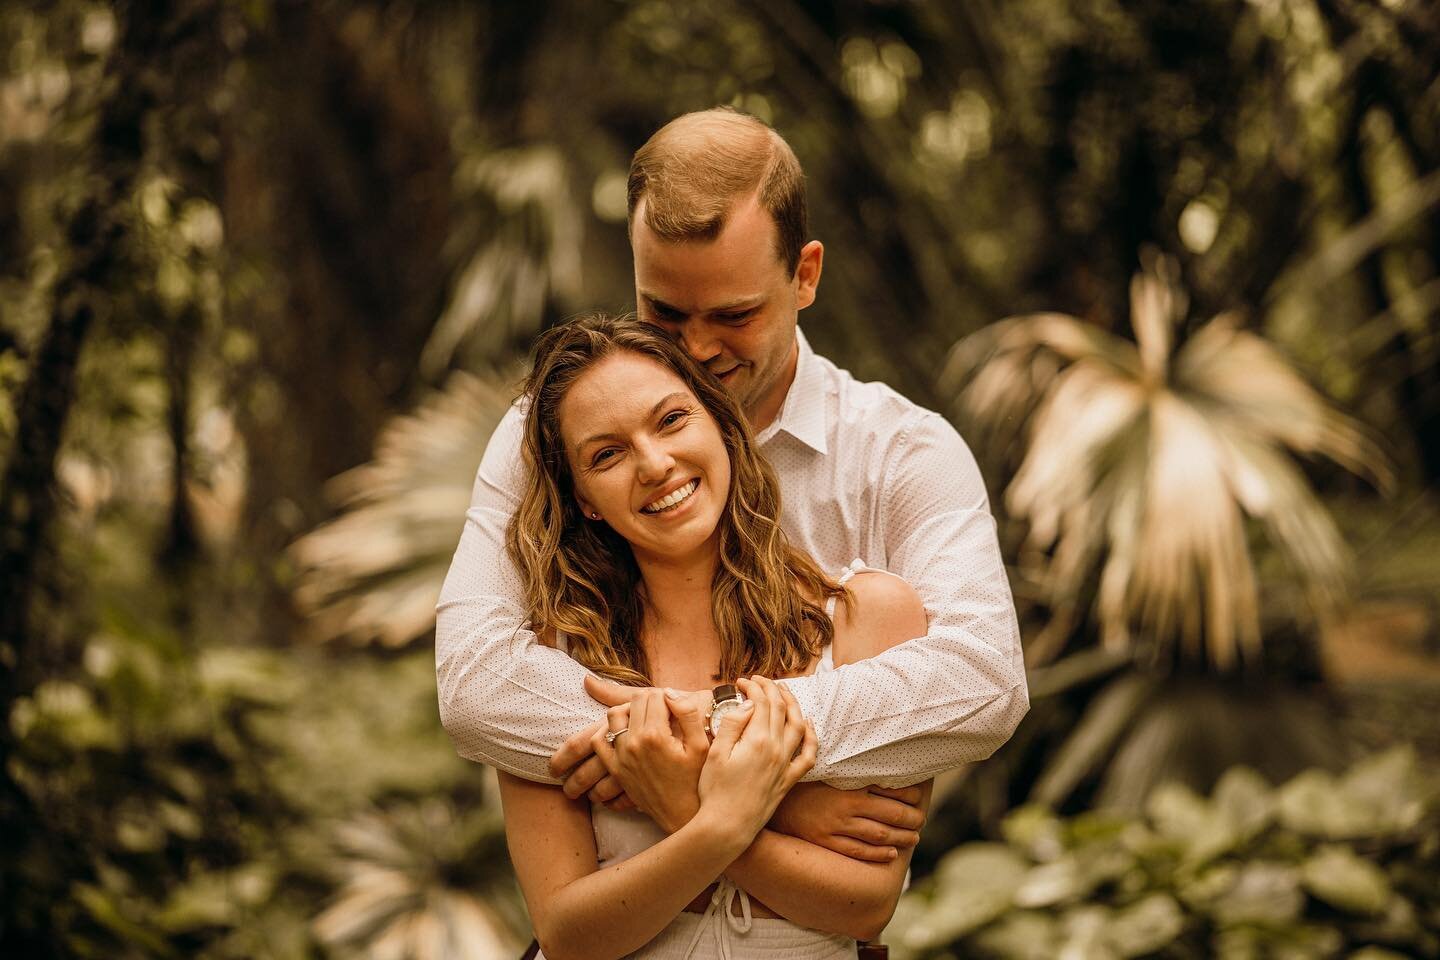 Traveling around Maui was incredible! So grateful once again for the amazing people who trust me to not only document a significant time in their lives but also let me create with them! ❤️✨
.
.
.
.
.
.
#weddingphotographer #weddingphotoideas #elopeme